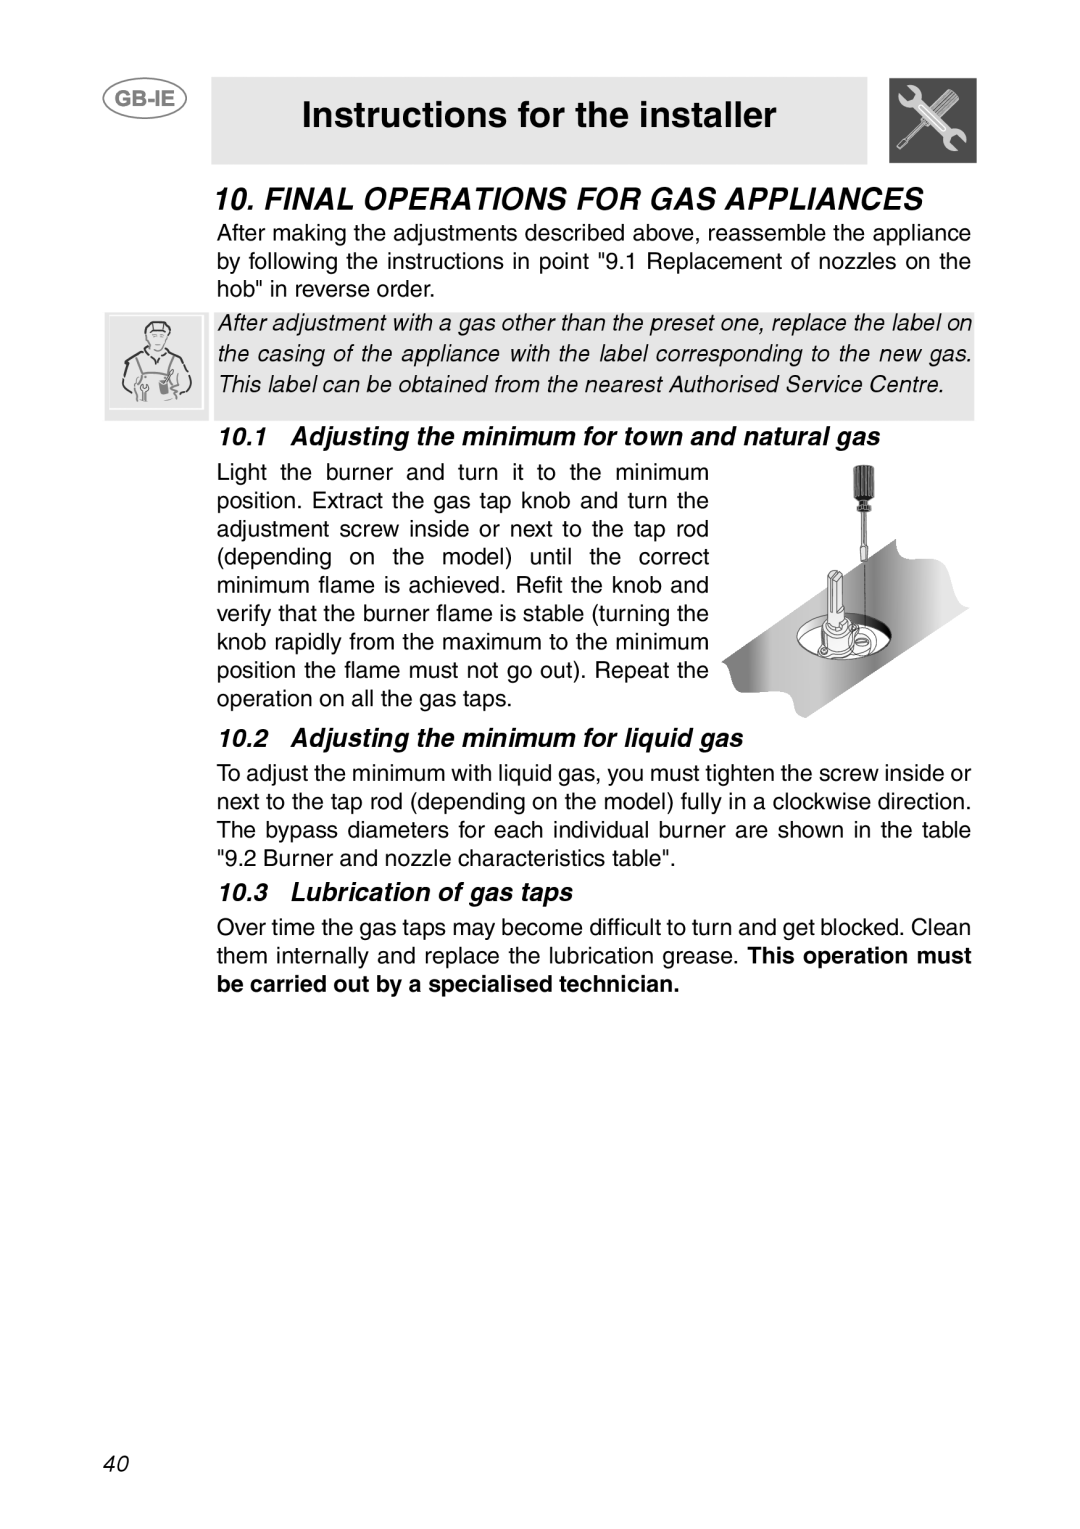 Smeg HB96CSS-3 Final Operations For Gas Appliances, Instructions for the installer, Adjusting the minimum for liquid gas 